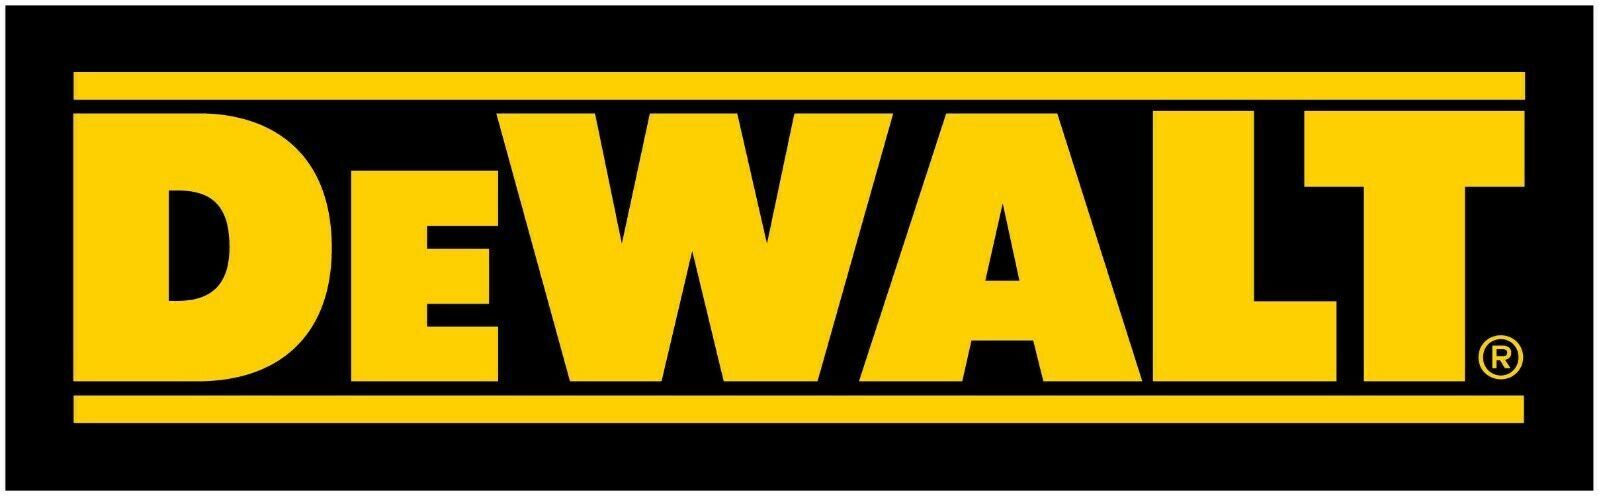 Dewalt Tools Yellow Text Logo Vinyl Decal / Sticker 10 Sizes With TRACKING